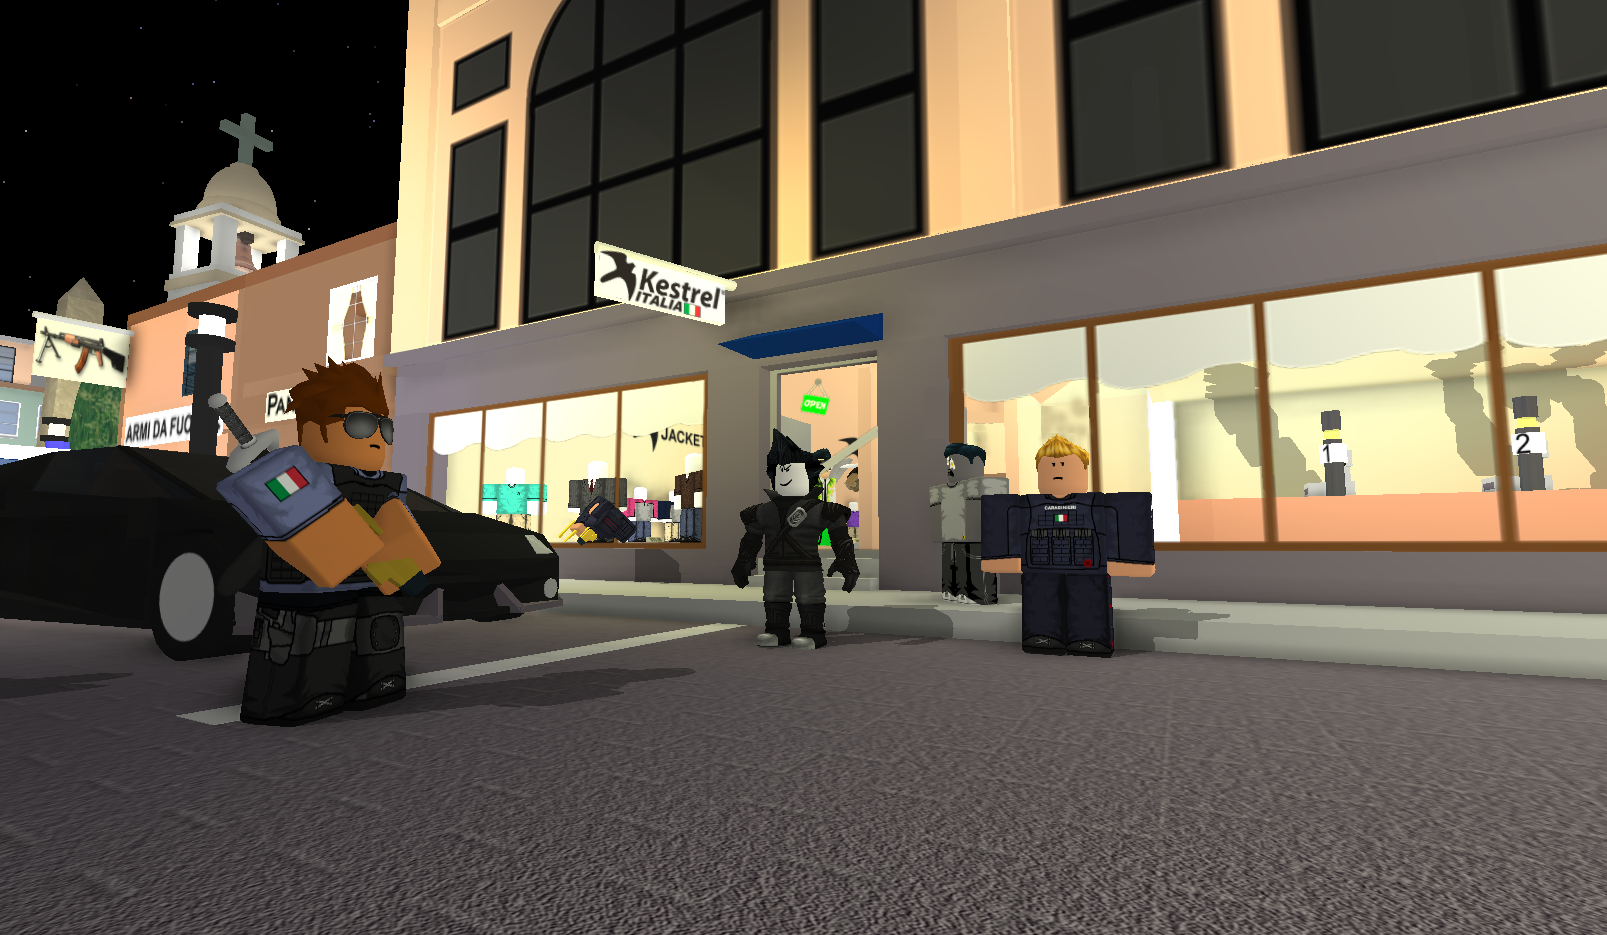 Spotlight Fighterace And The Kestrel Home Store Roblox Blog